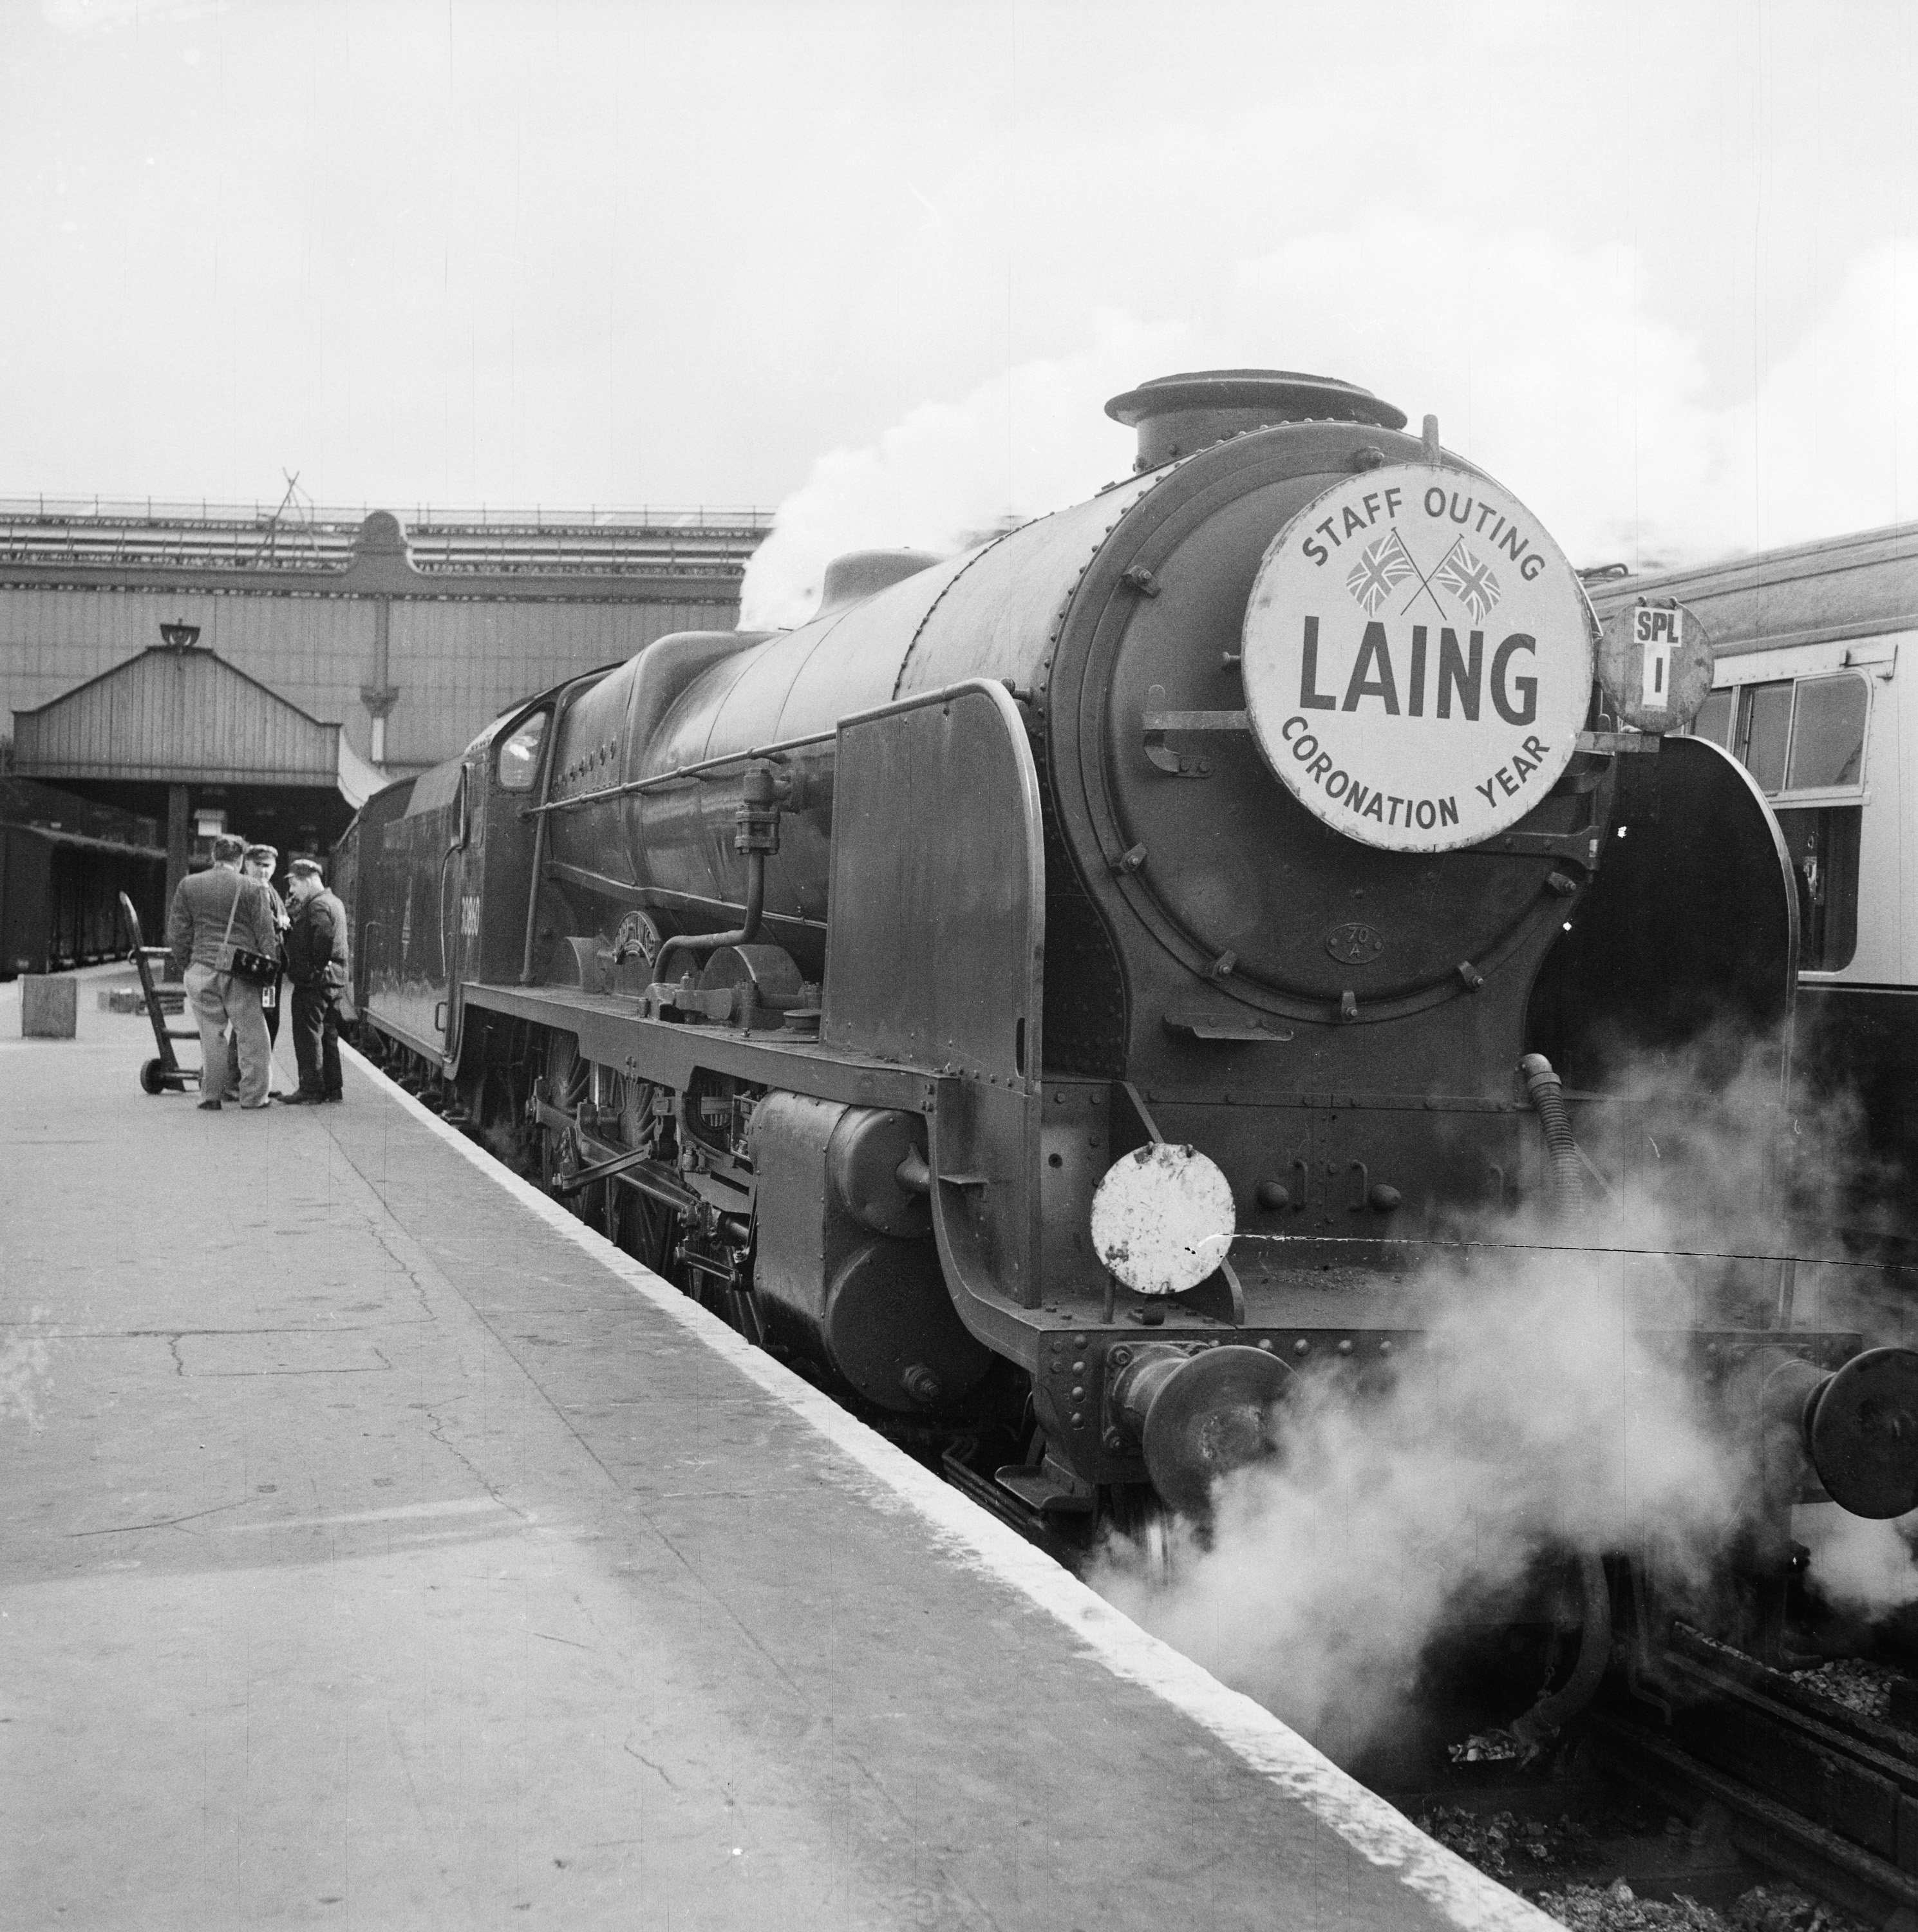 Steam train in station with a placard on the front which reads, 'LAING -  STAFF OUTING - CORONATION YEAR'